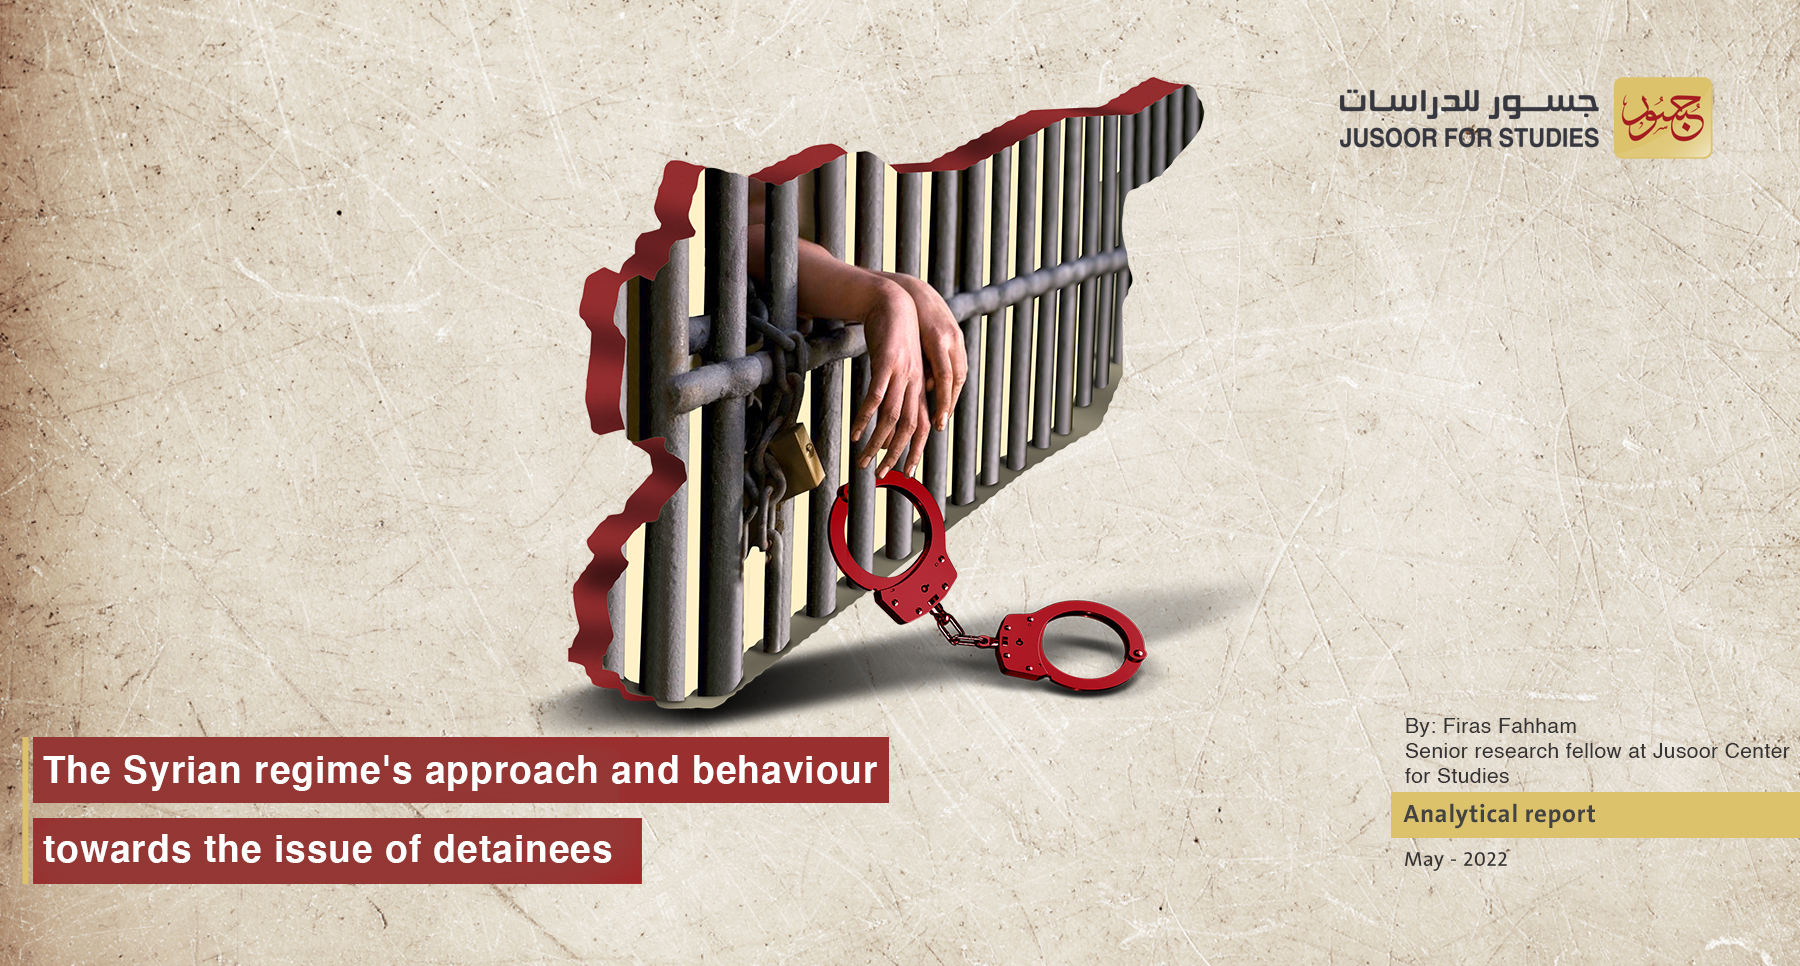 The Syrian regime's approach and behaviour towards the issue of detainees